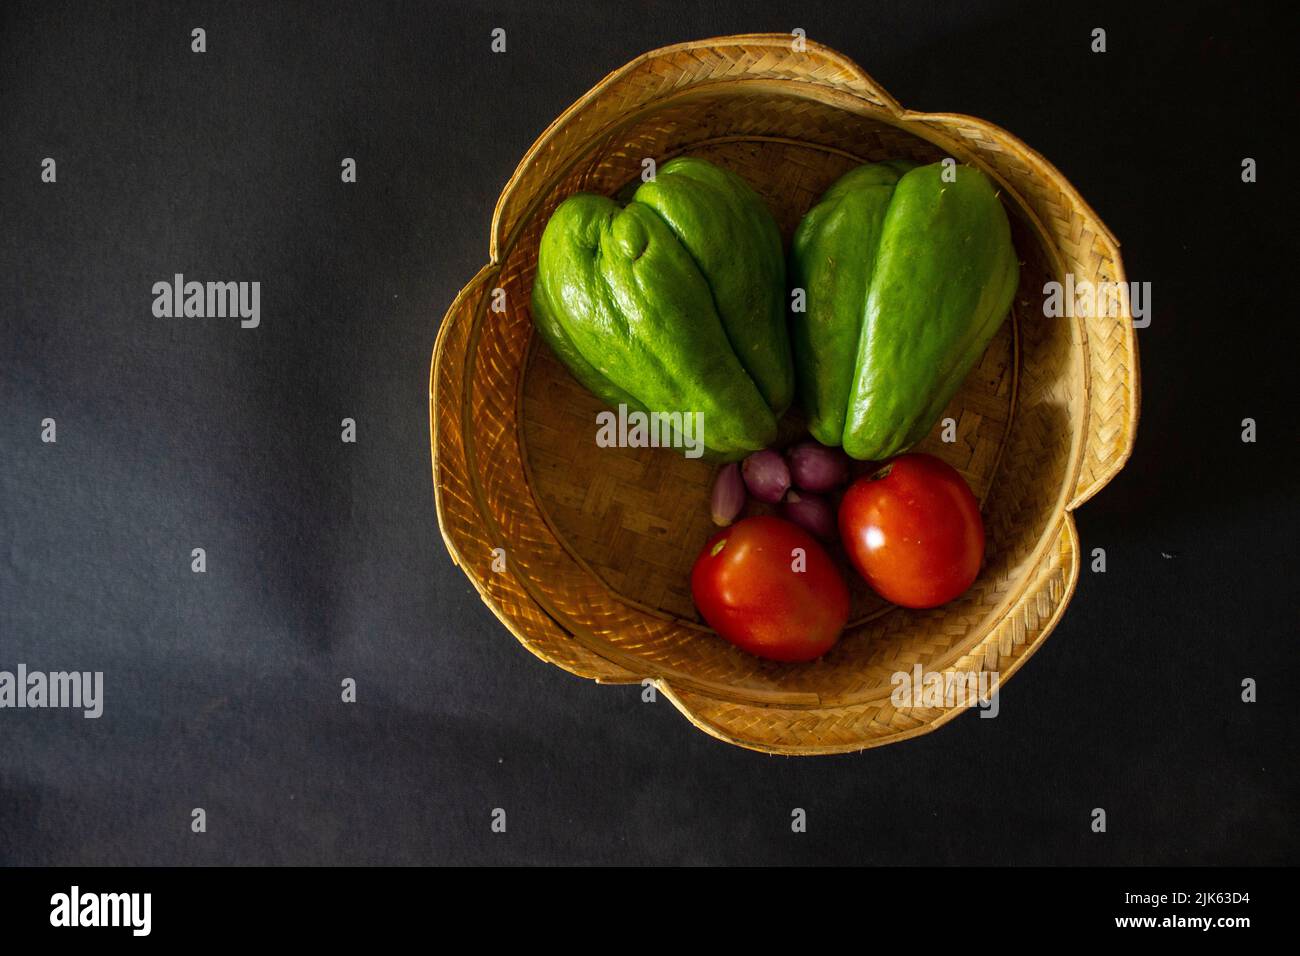 tropical tomatoes with jipang or labu siam or chayote and onion are served in a basket isolated on black background Stock Photo